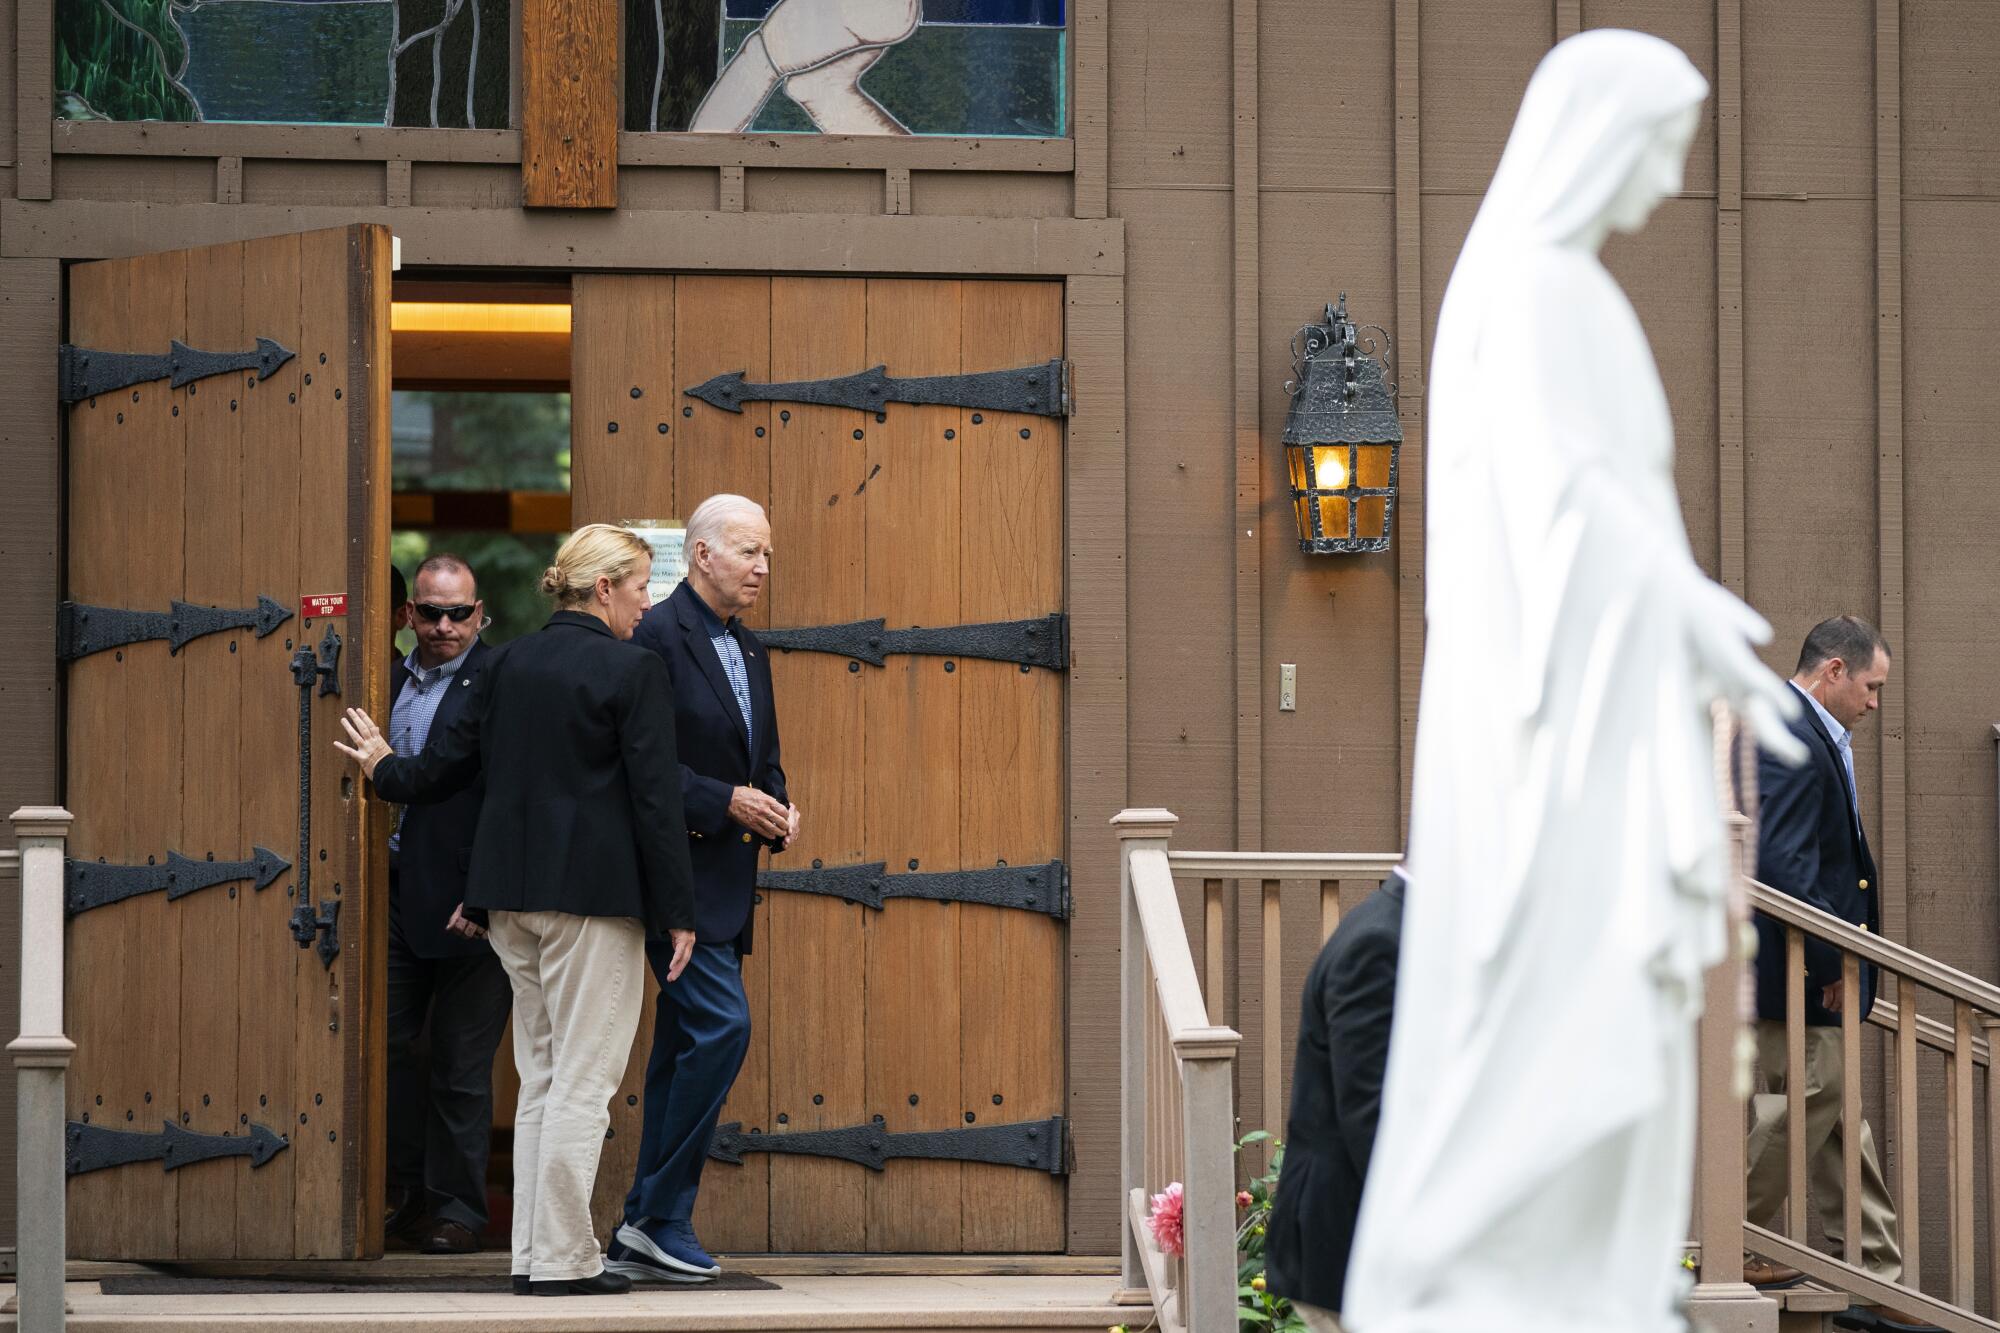 President Joe Biden leaves Our Lady of Tahoe Catholic Church after attending Mass.